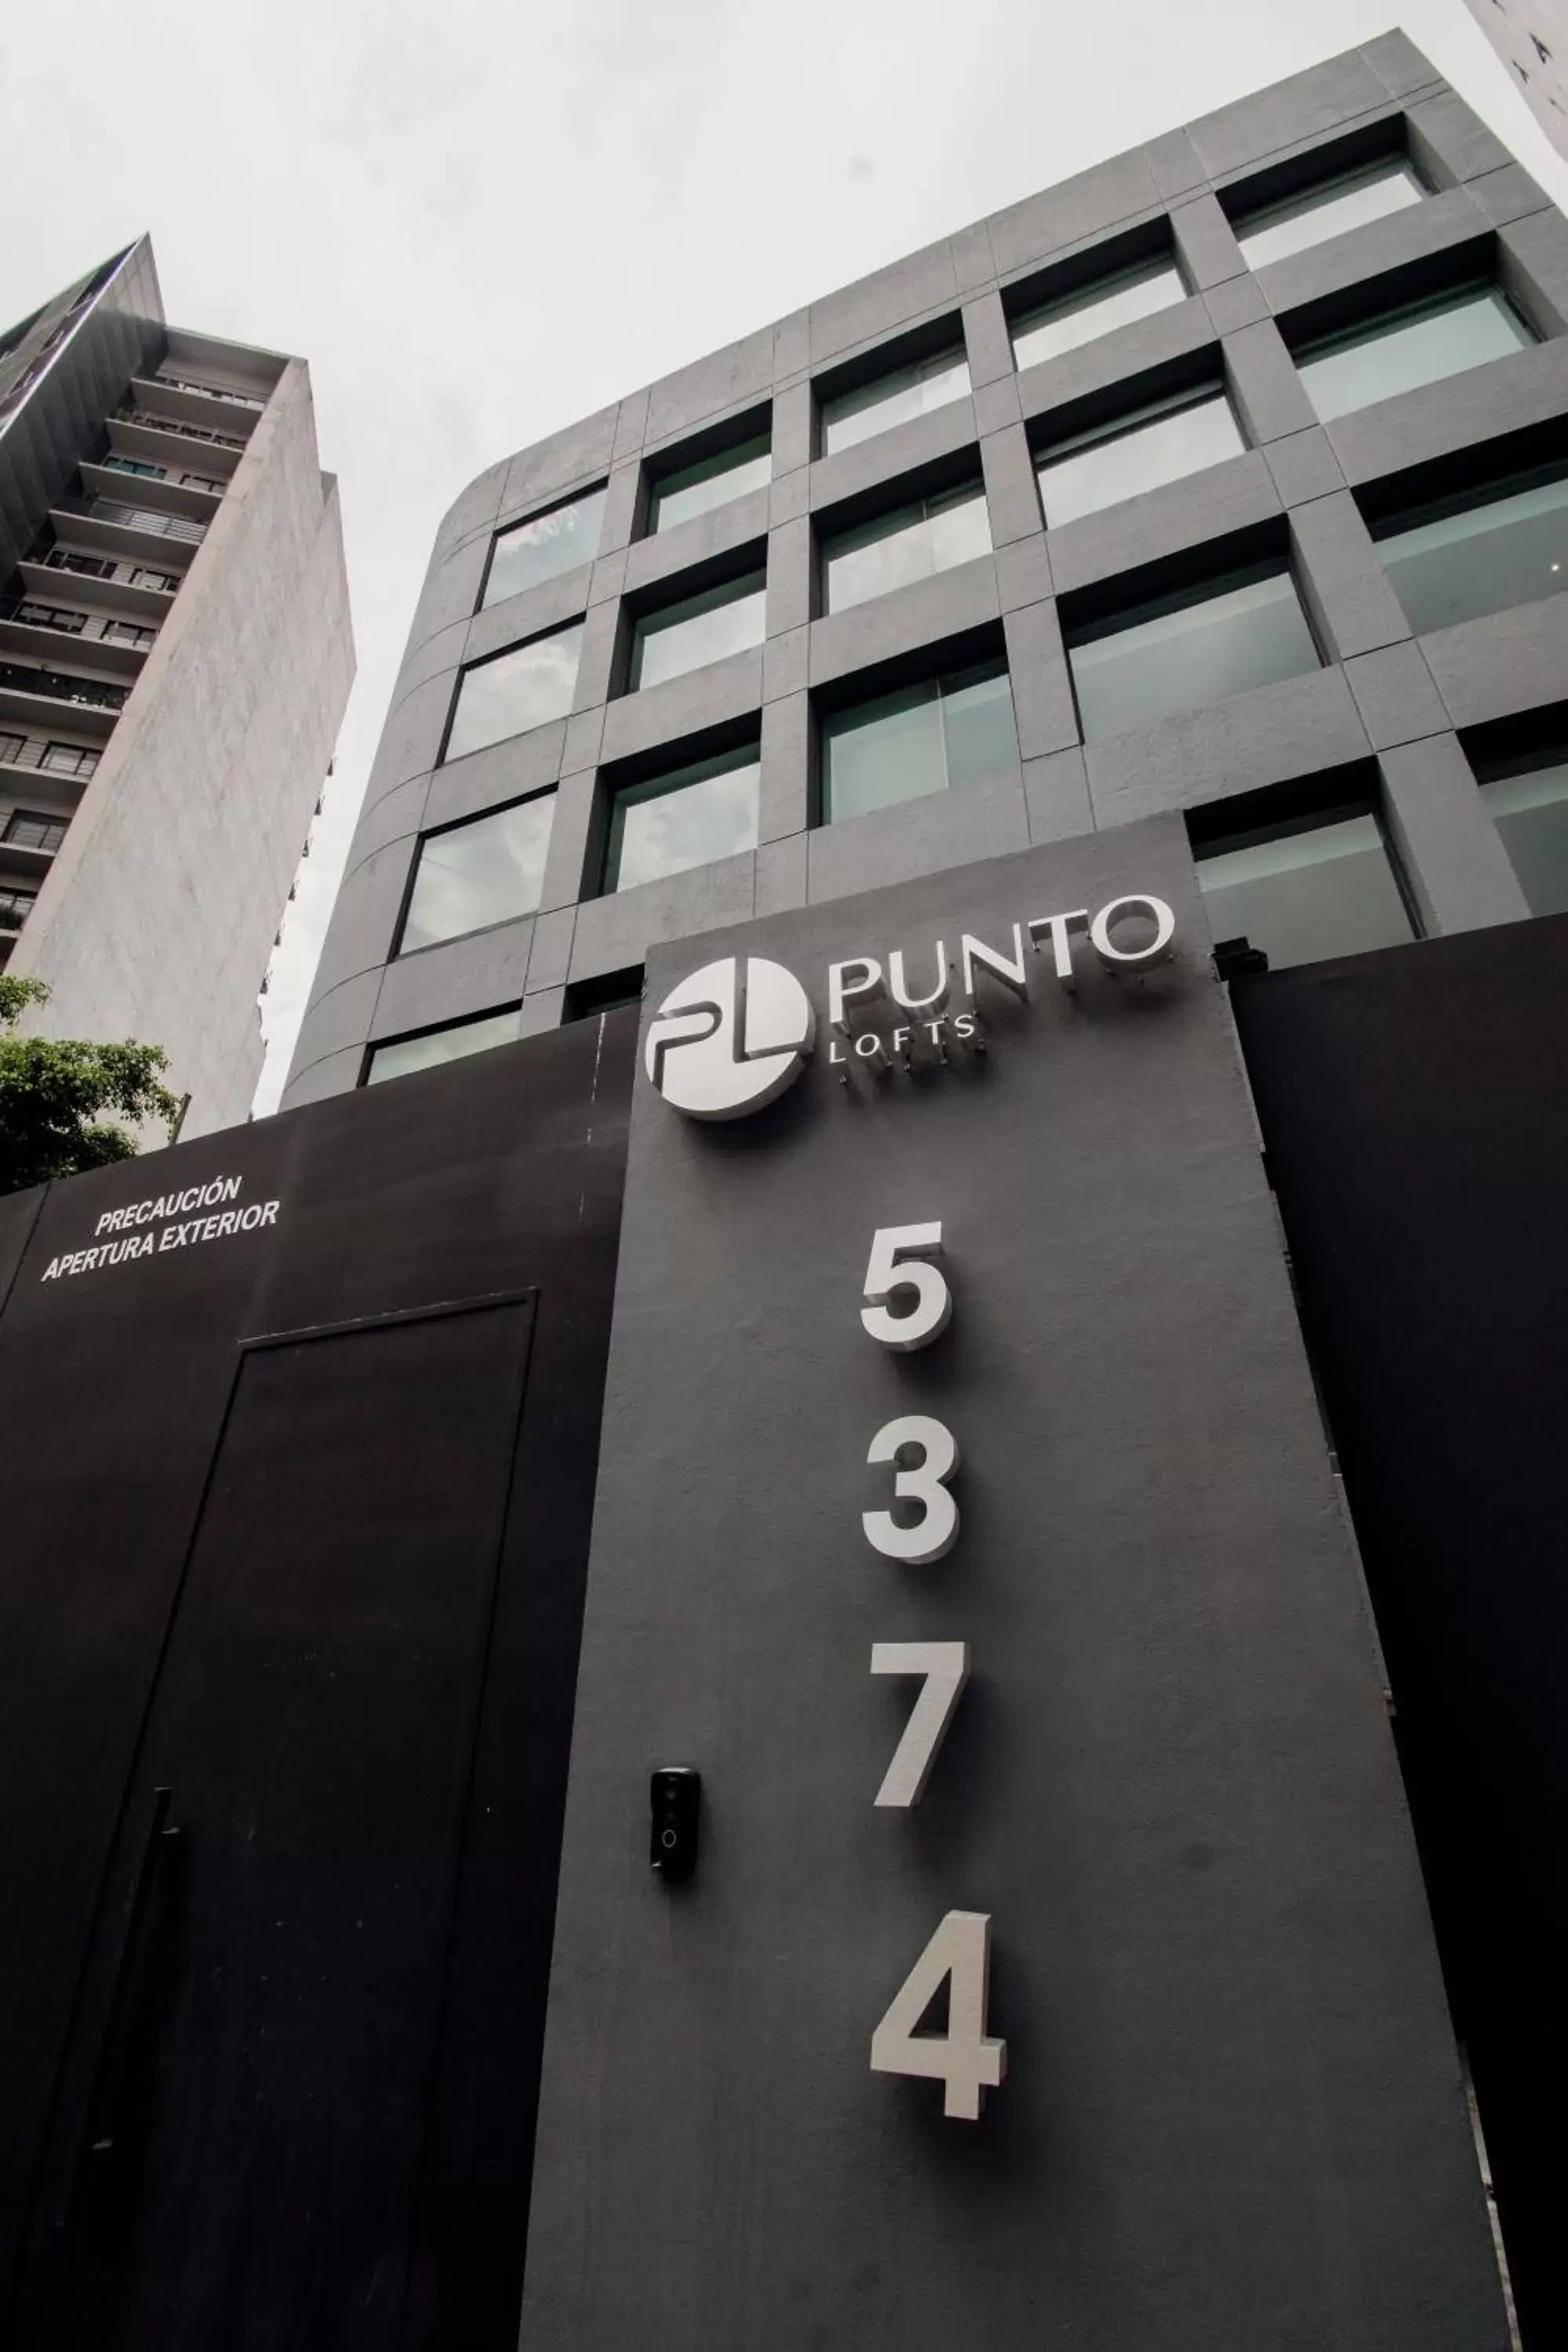 Street view, Property Building in Punto Lofts